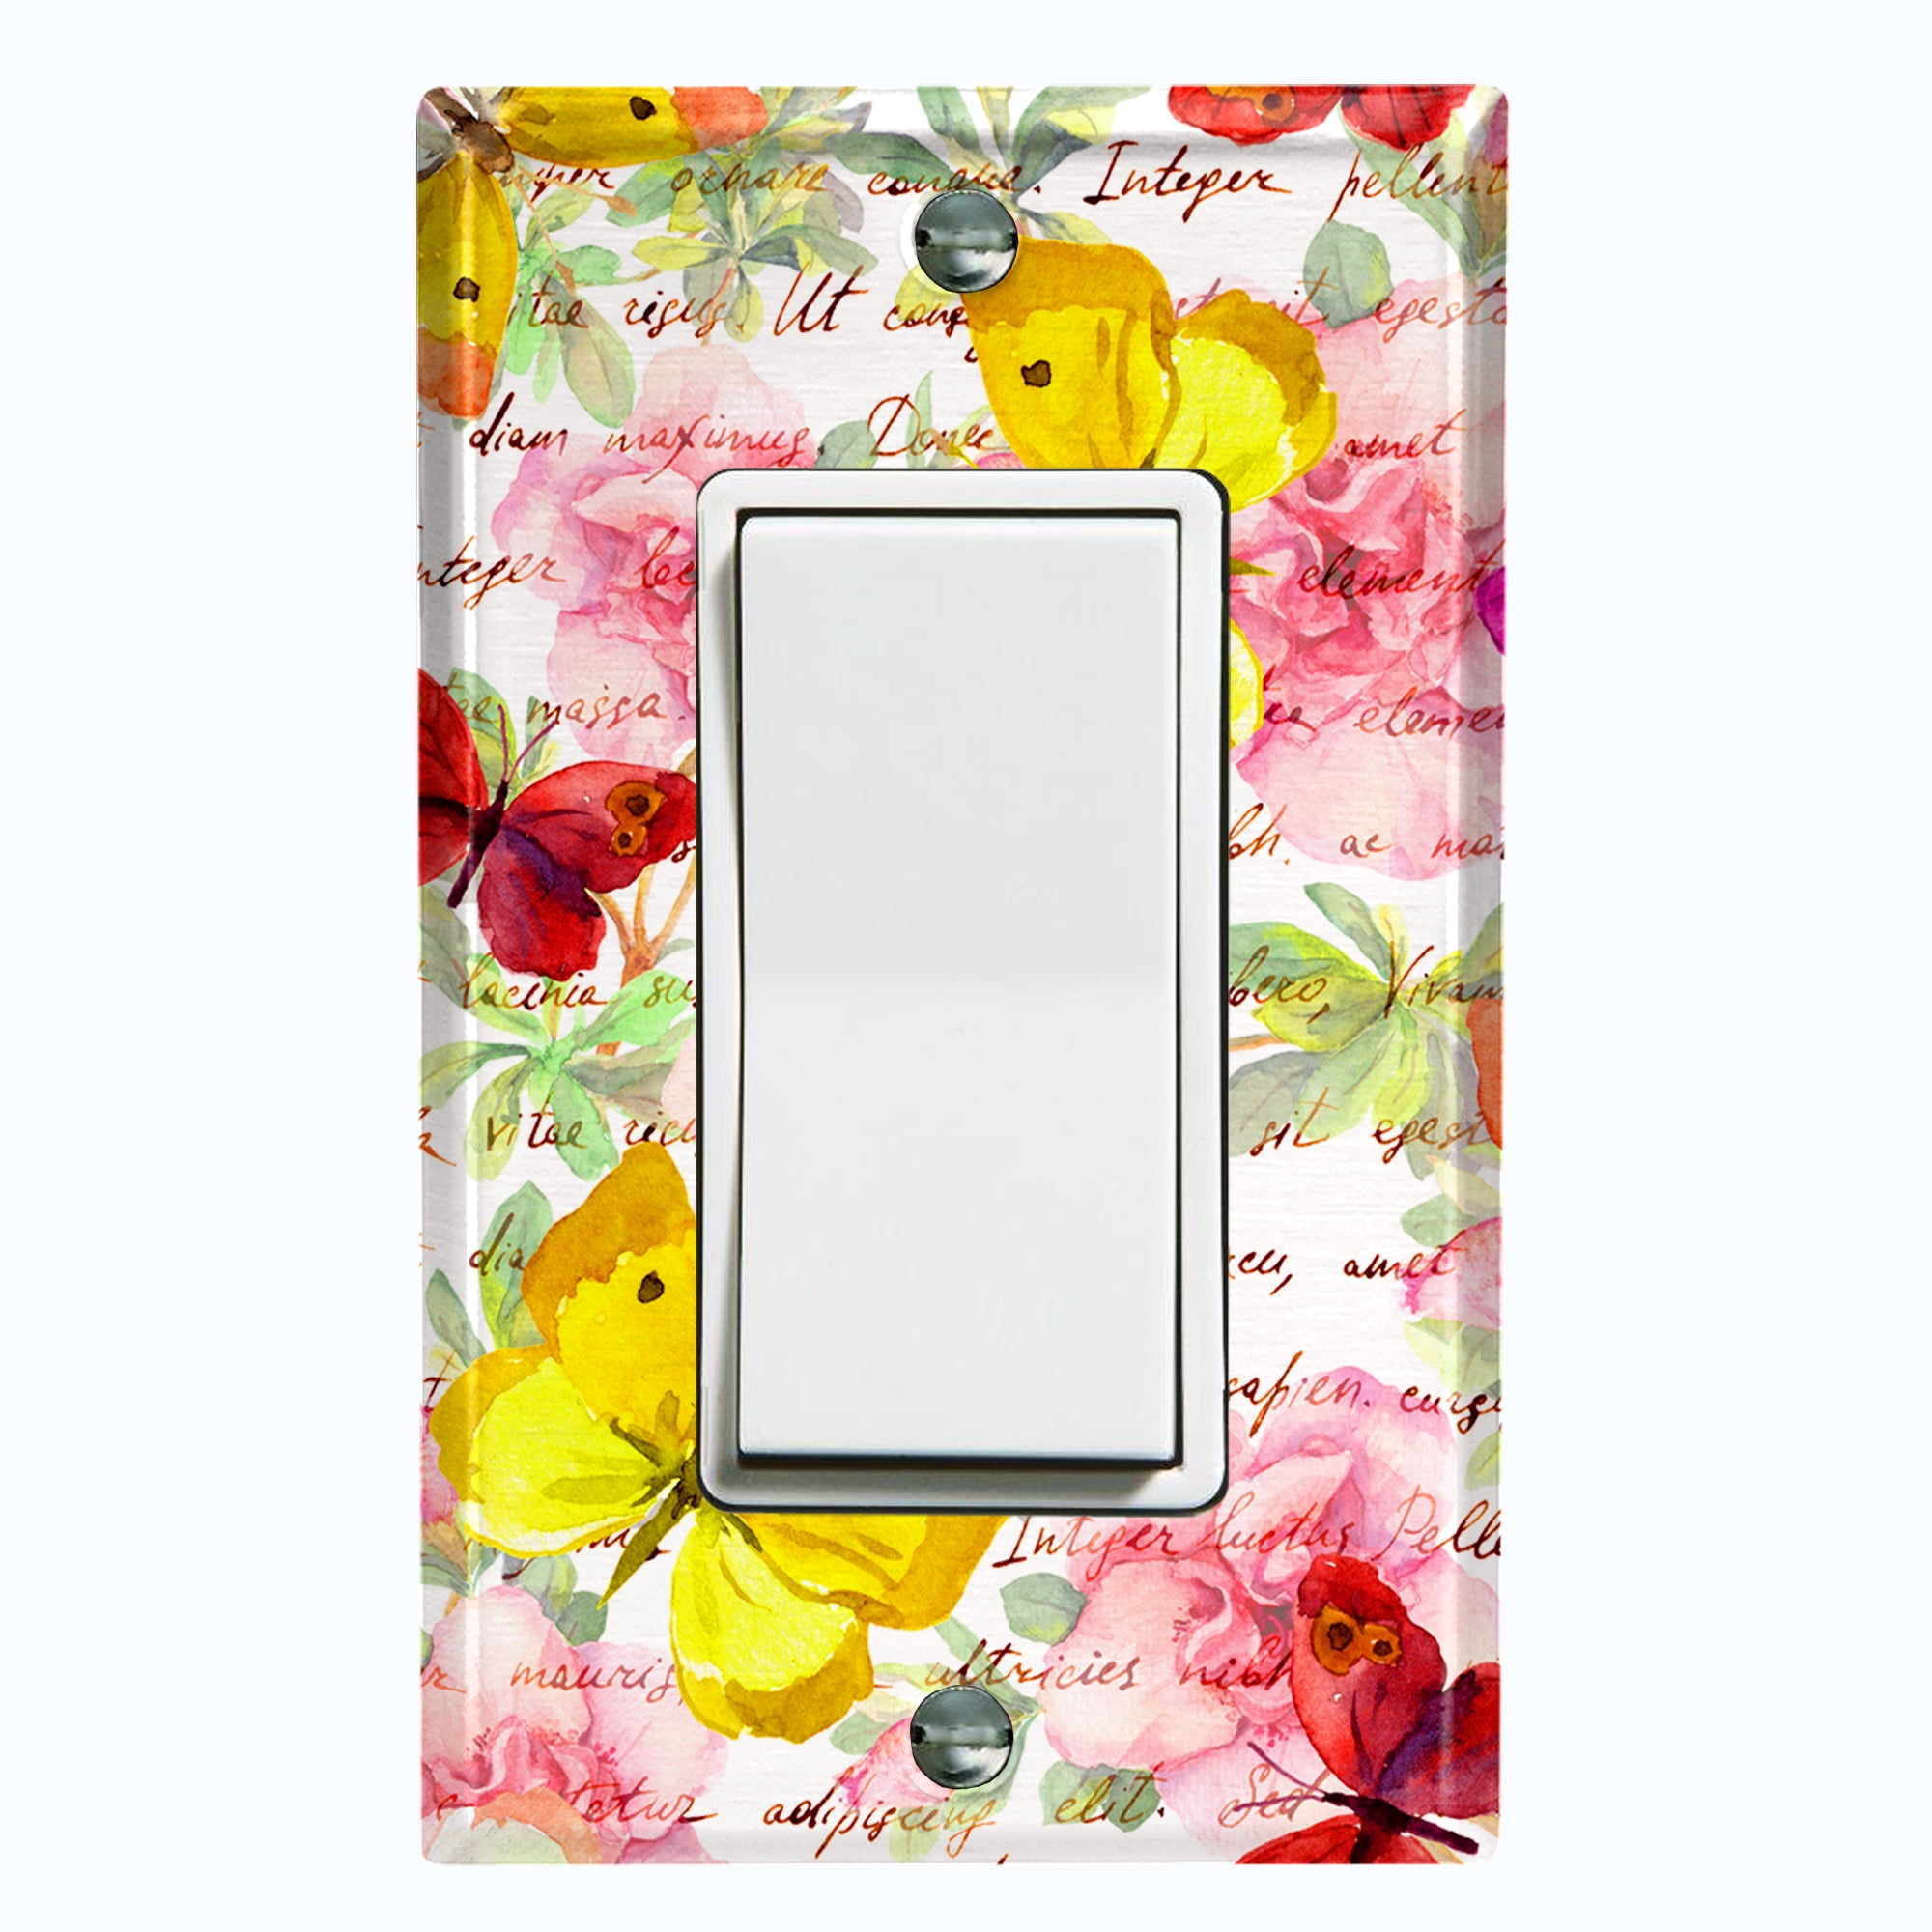 RED ROSES VICTORIAN IMAGE # 1 LIGHT SWITCH COVER PLATE AND OUTLETS 